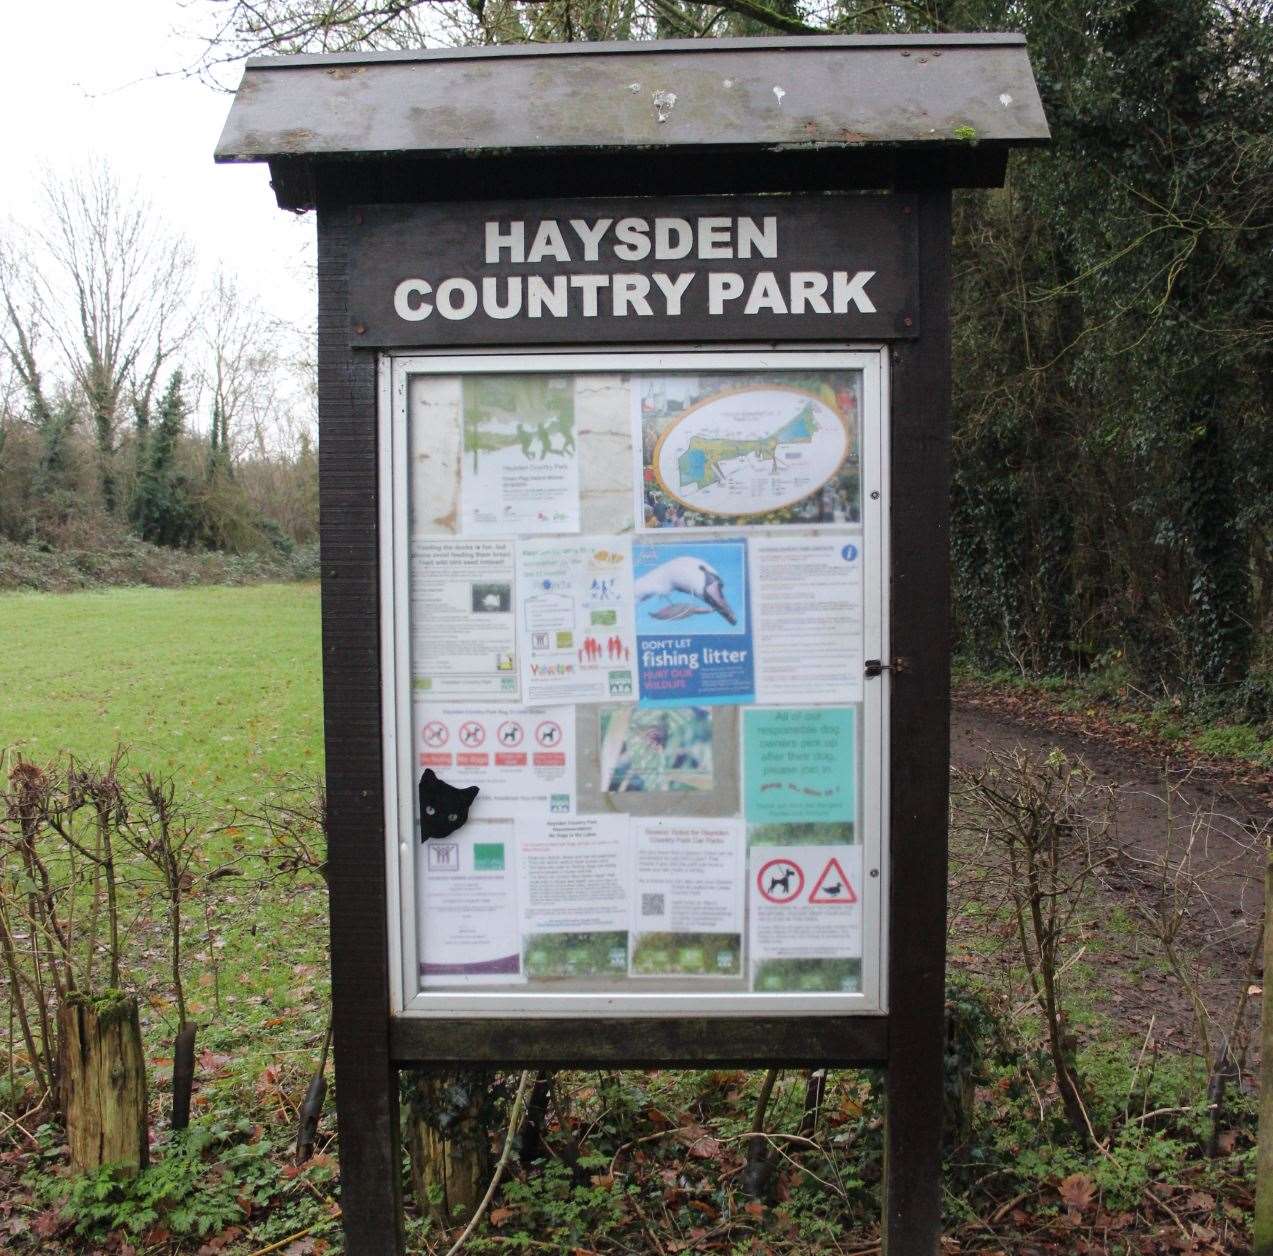 The cost of parking at Haysden Country Park is to go up